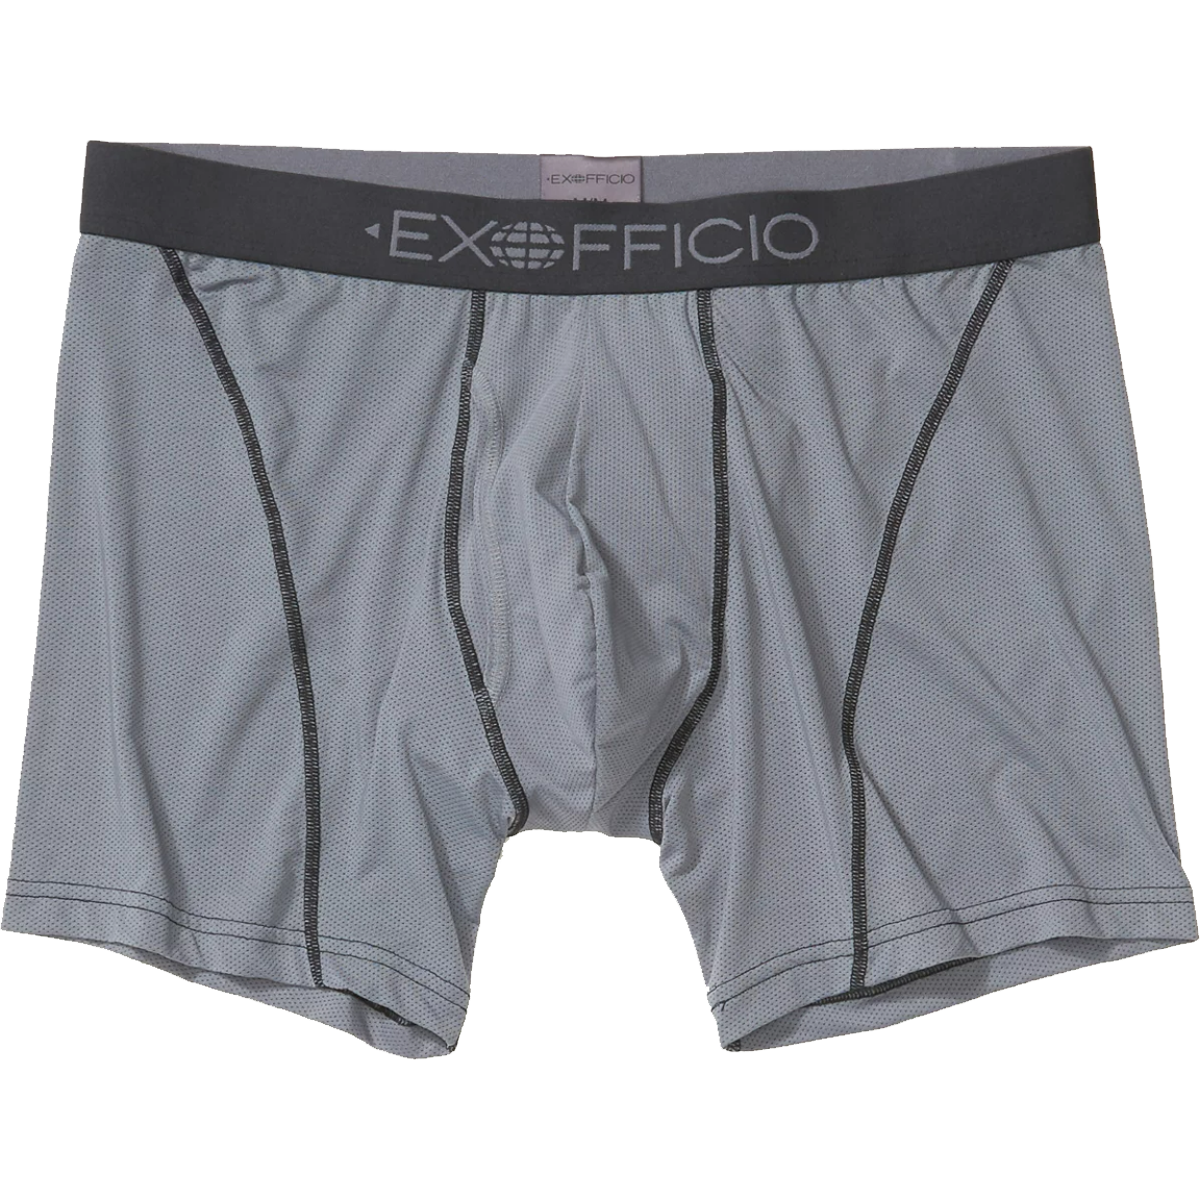 Sunnyside Boxer Brief with Wholester – Sports Basement